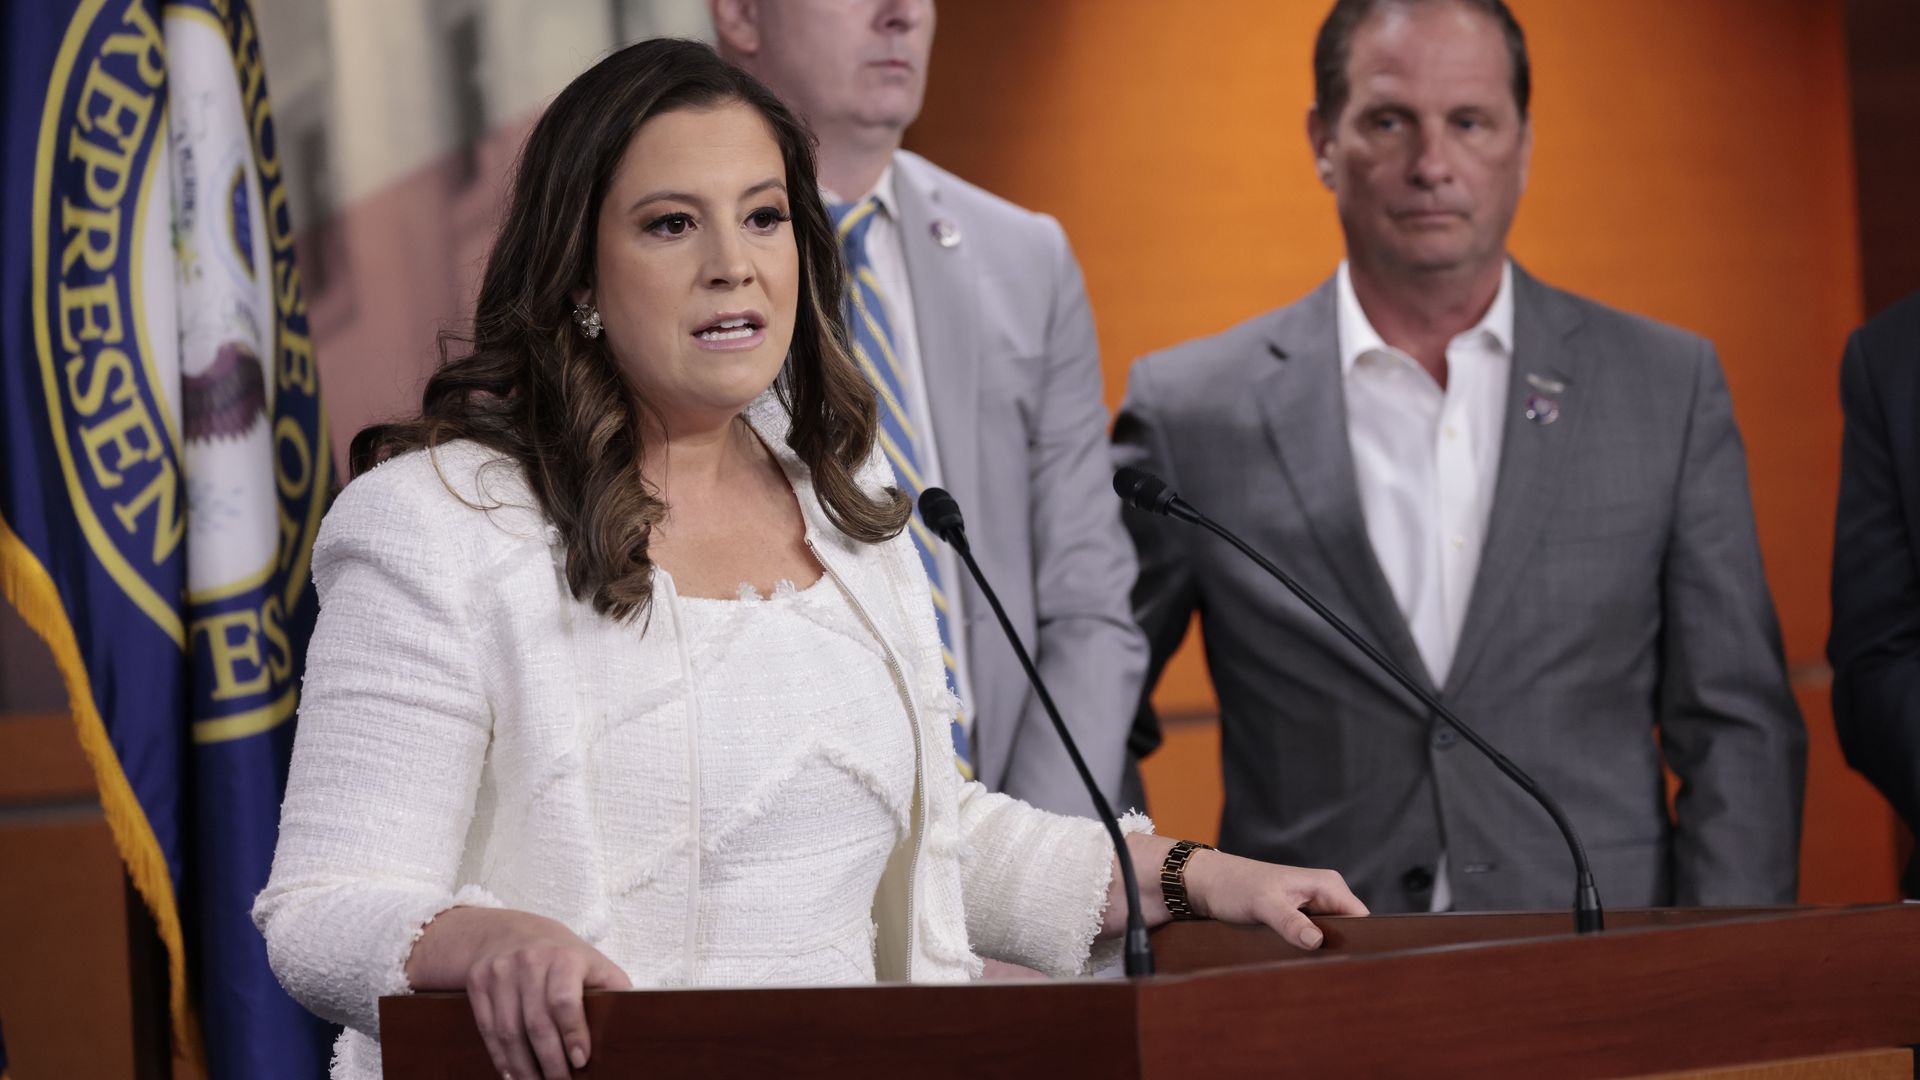 Representative Elise Stefanik, a Republican from New York, speaks during a news conference on recent actions of the FBI at the US Capitol in Washington, D.C., US, on Friday, Aug. 12, 2022